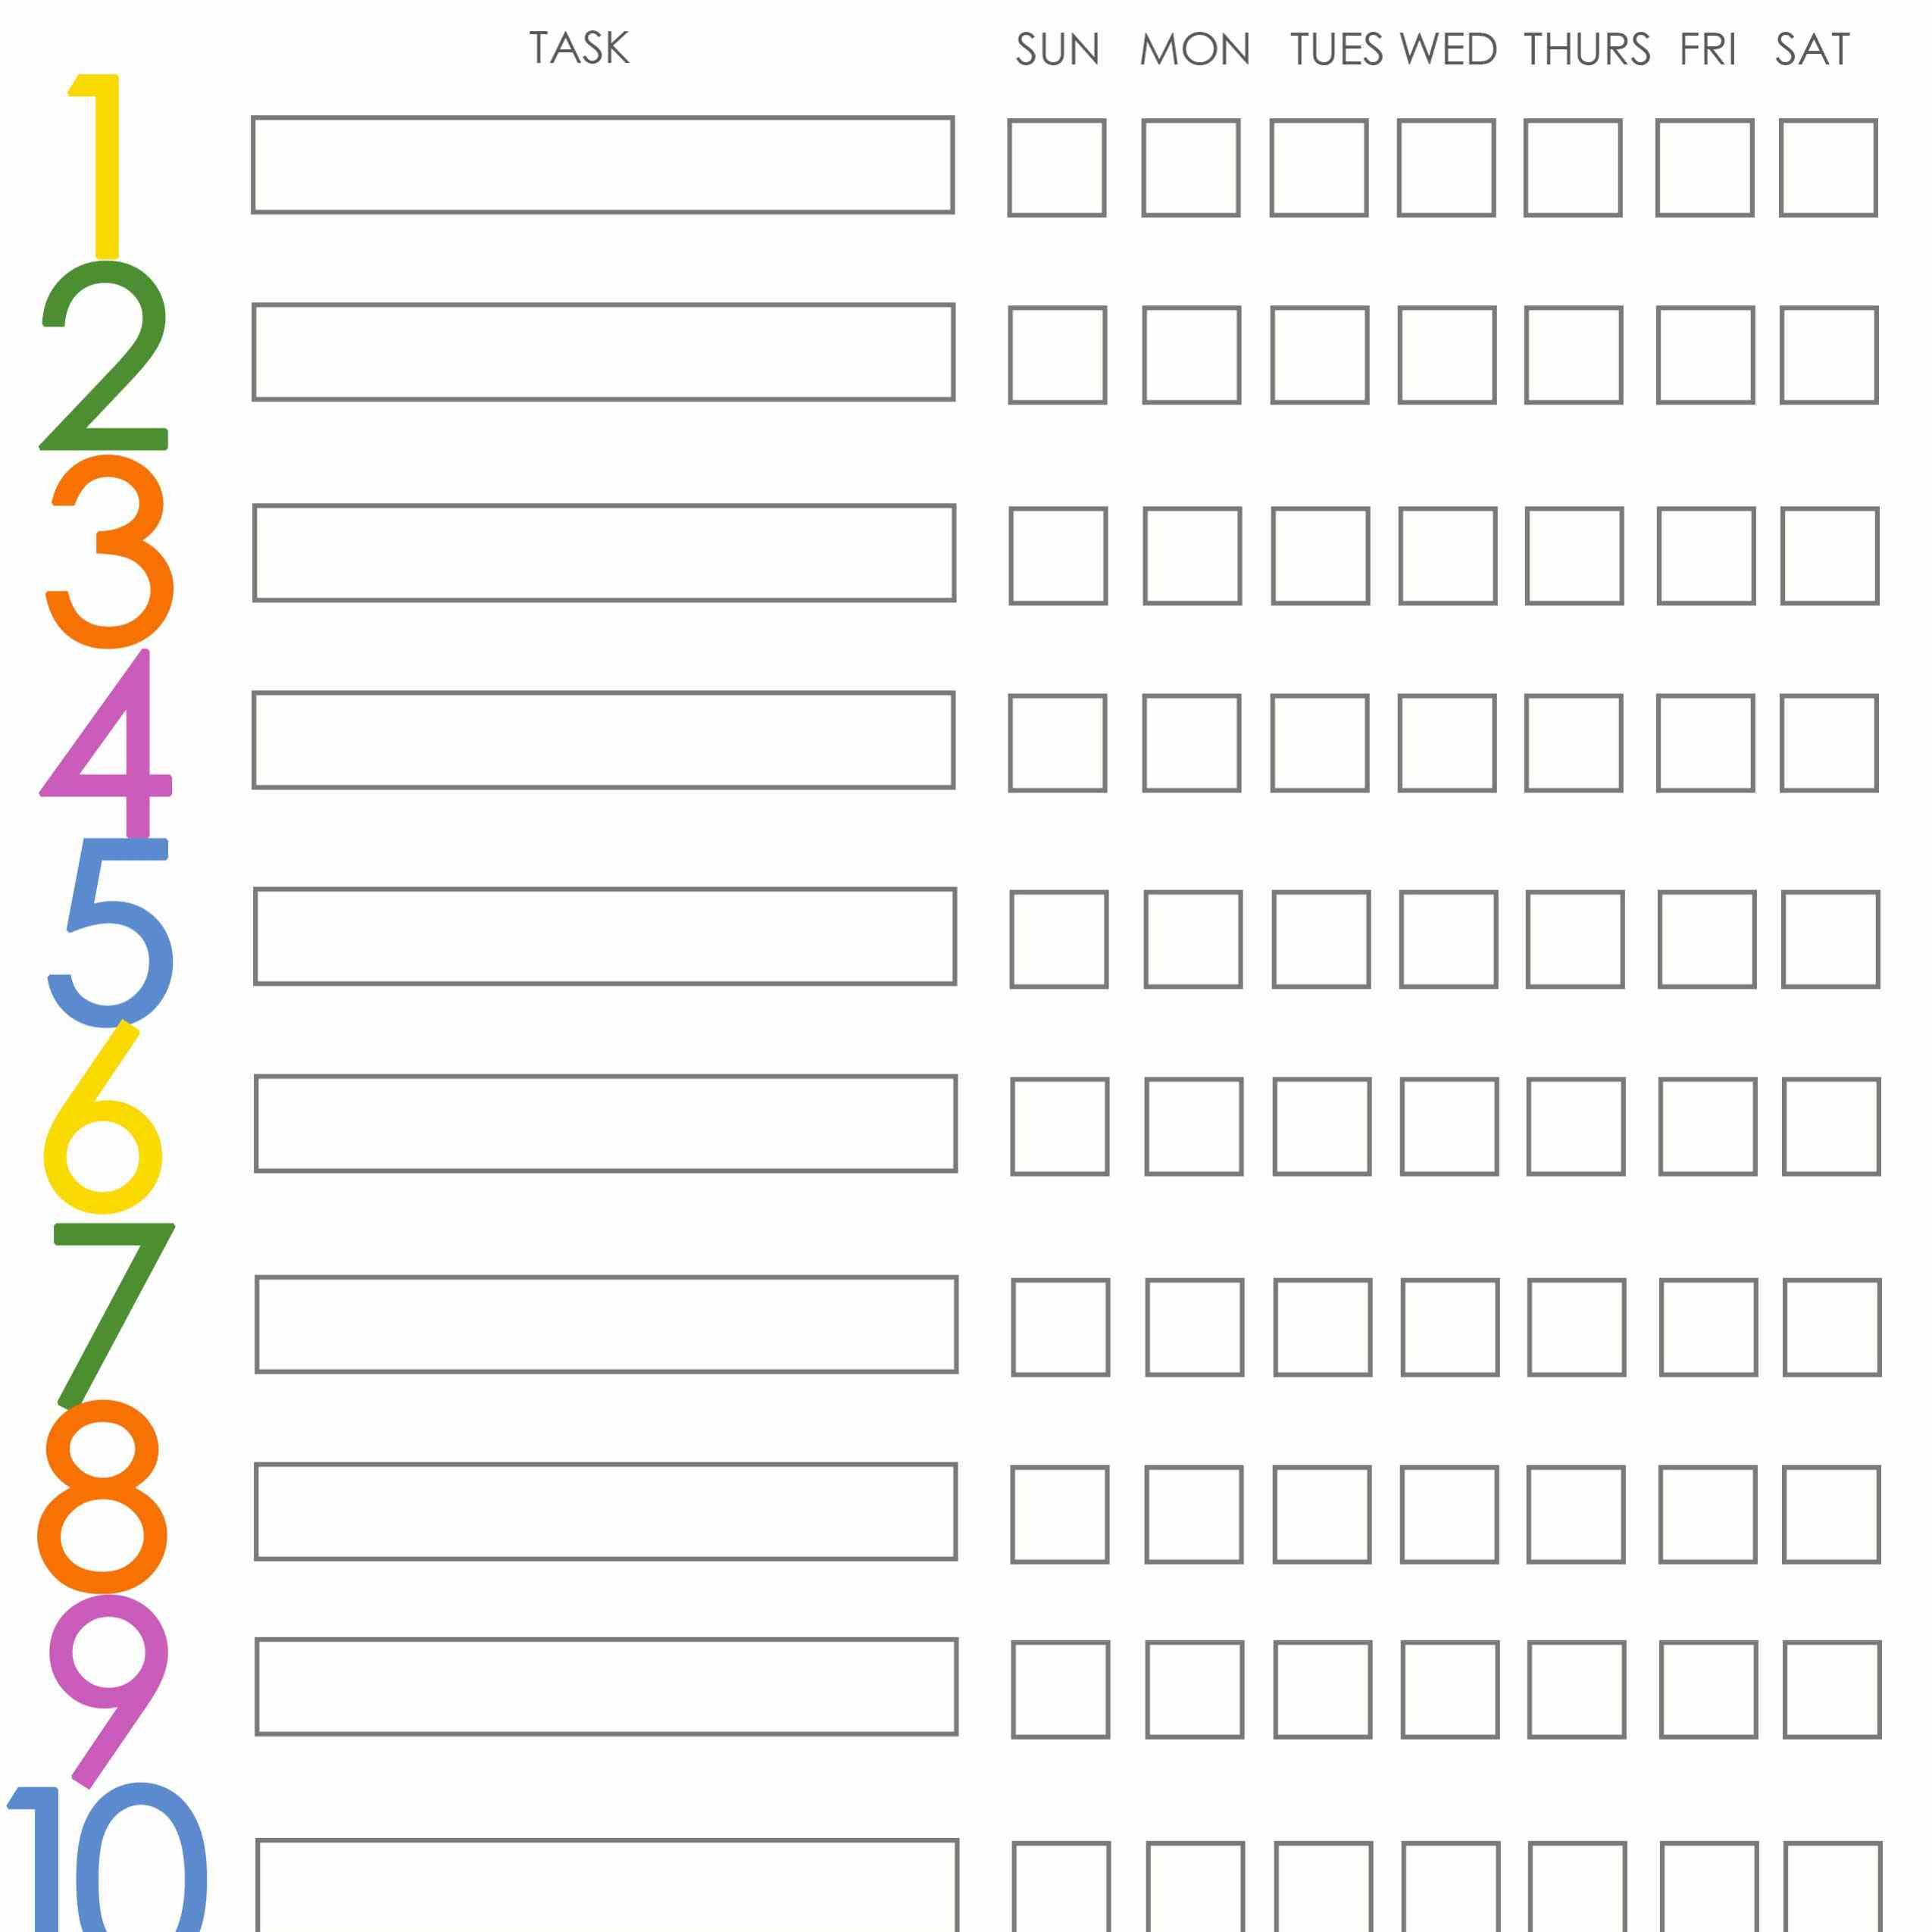 Free Printable Weekly Chore Charts - Free Printable Pictures For Chore Charts